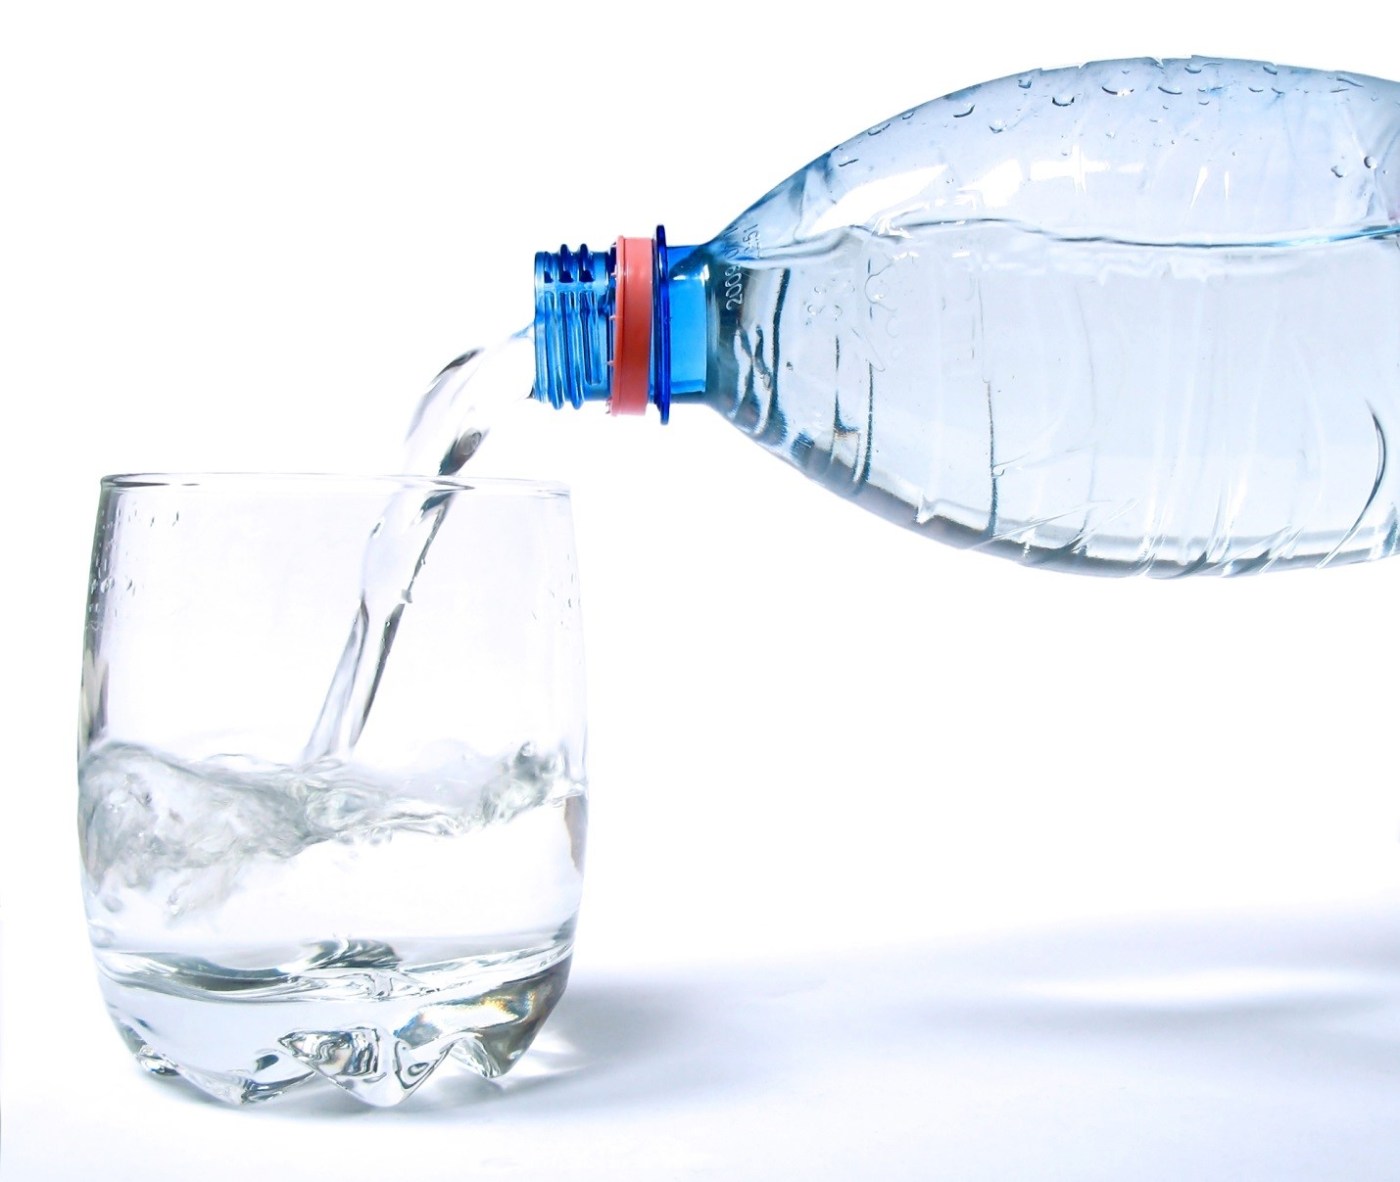 This blog discusses why staying hydrated is important.